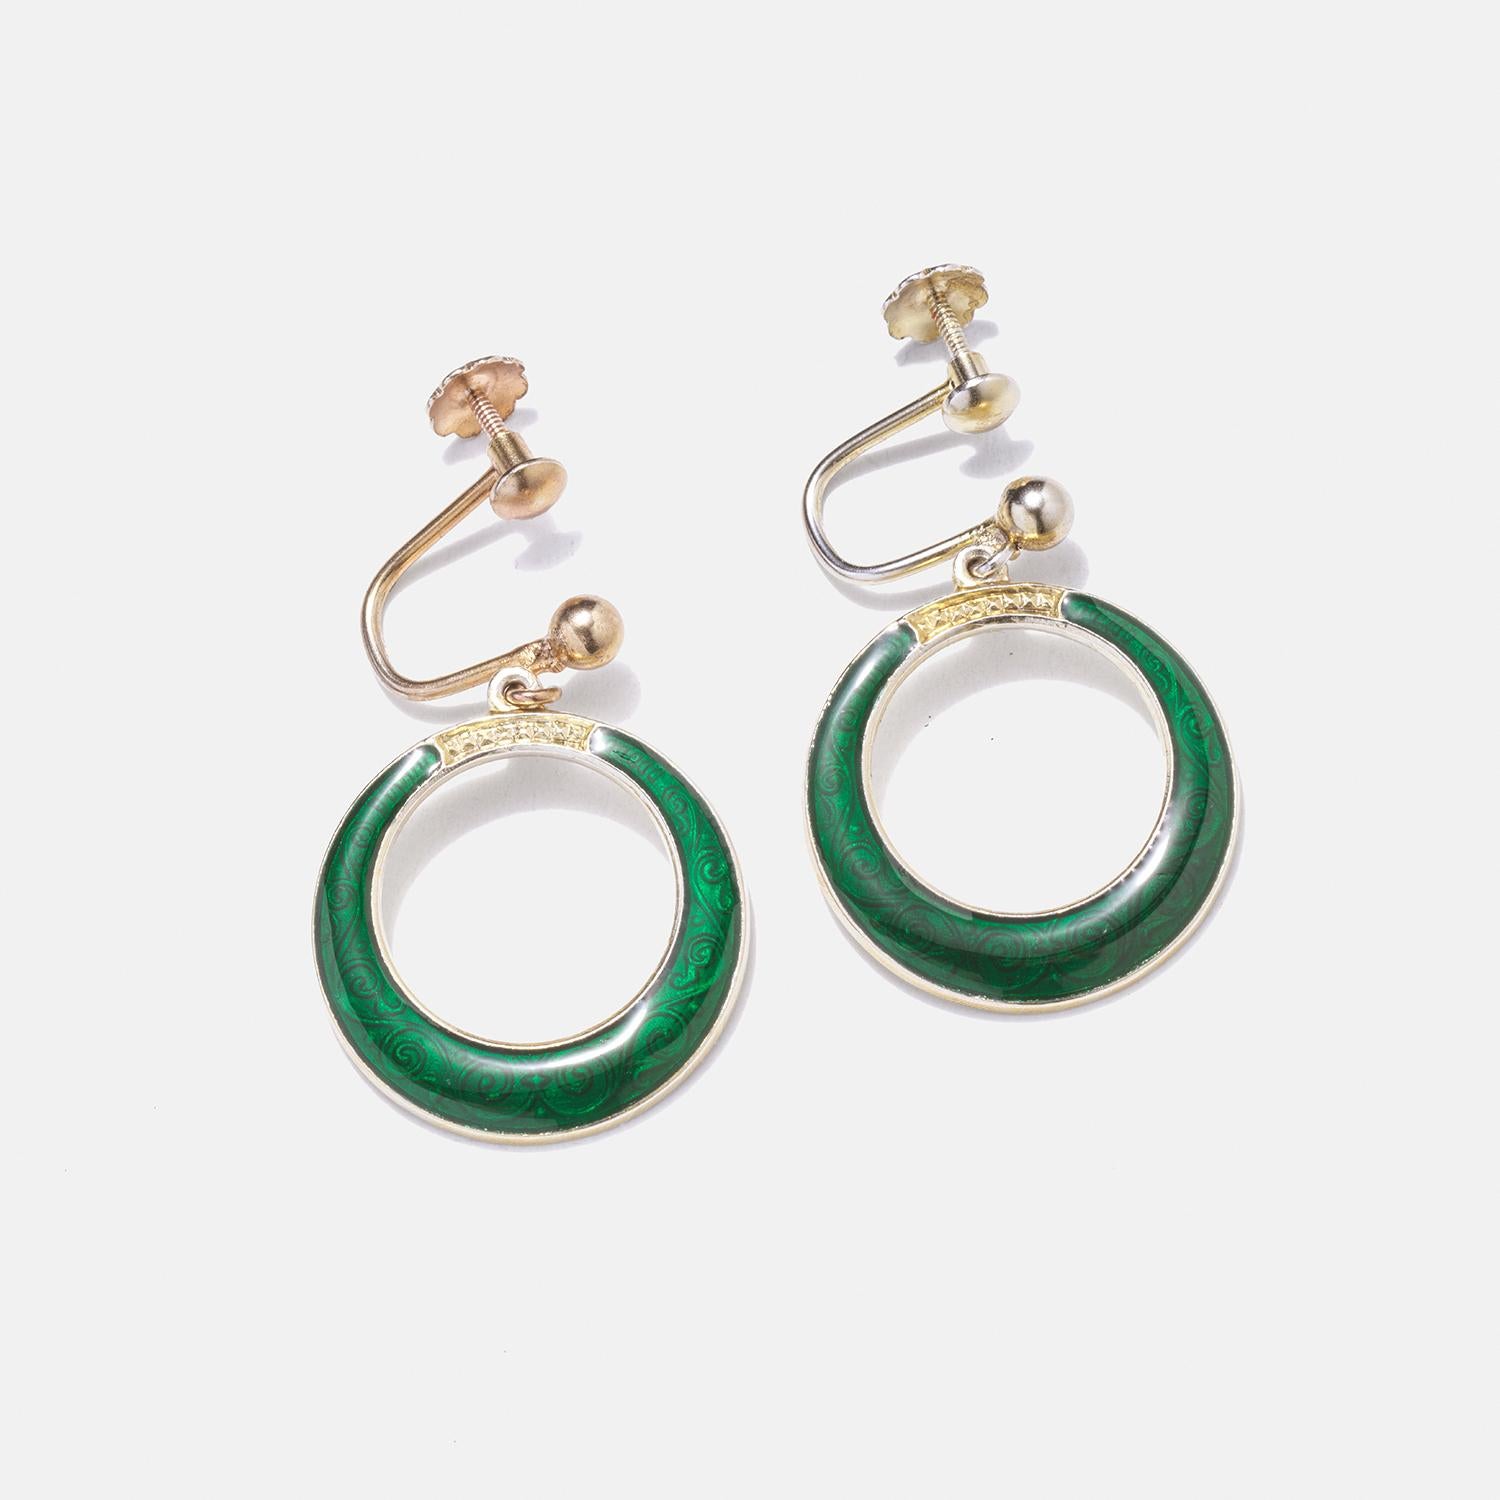 These gilded silver earrings are elegantly crafted with a round shape, featuring a vibrant green enamel inlay with an intricate filigree pattern that adds a touch of mystery. The gilded silver part of the earrings is delicately adorned with a